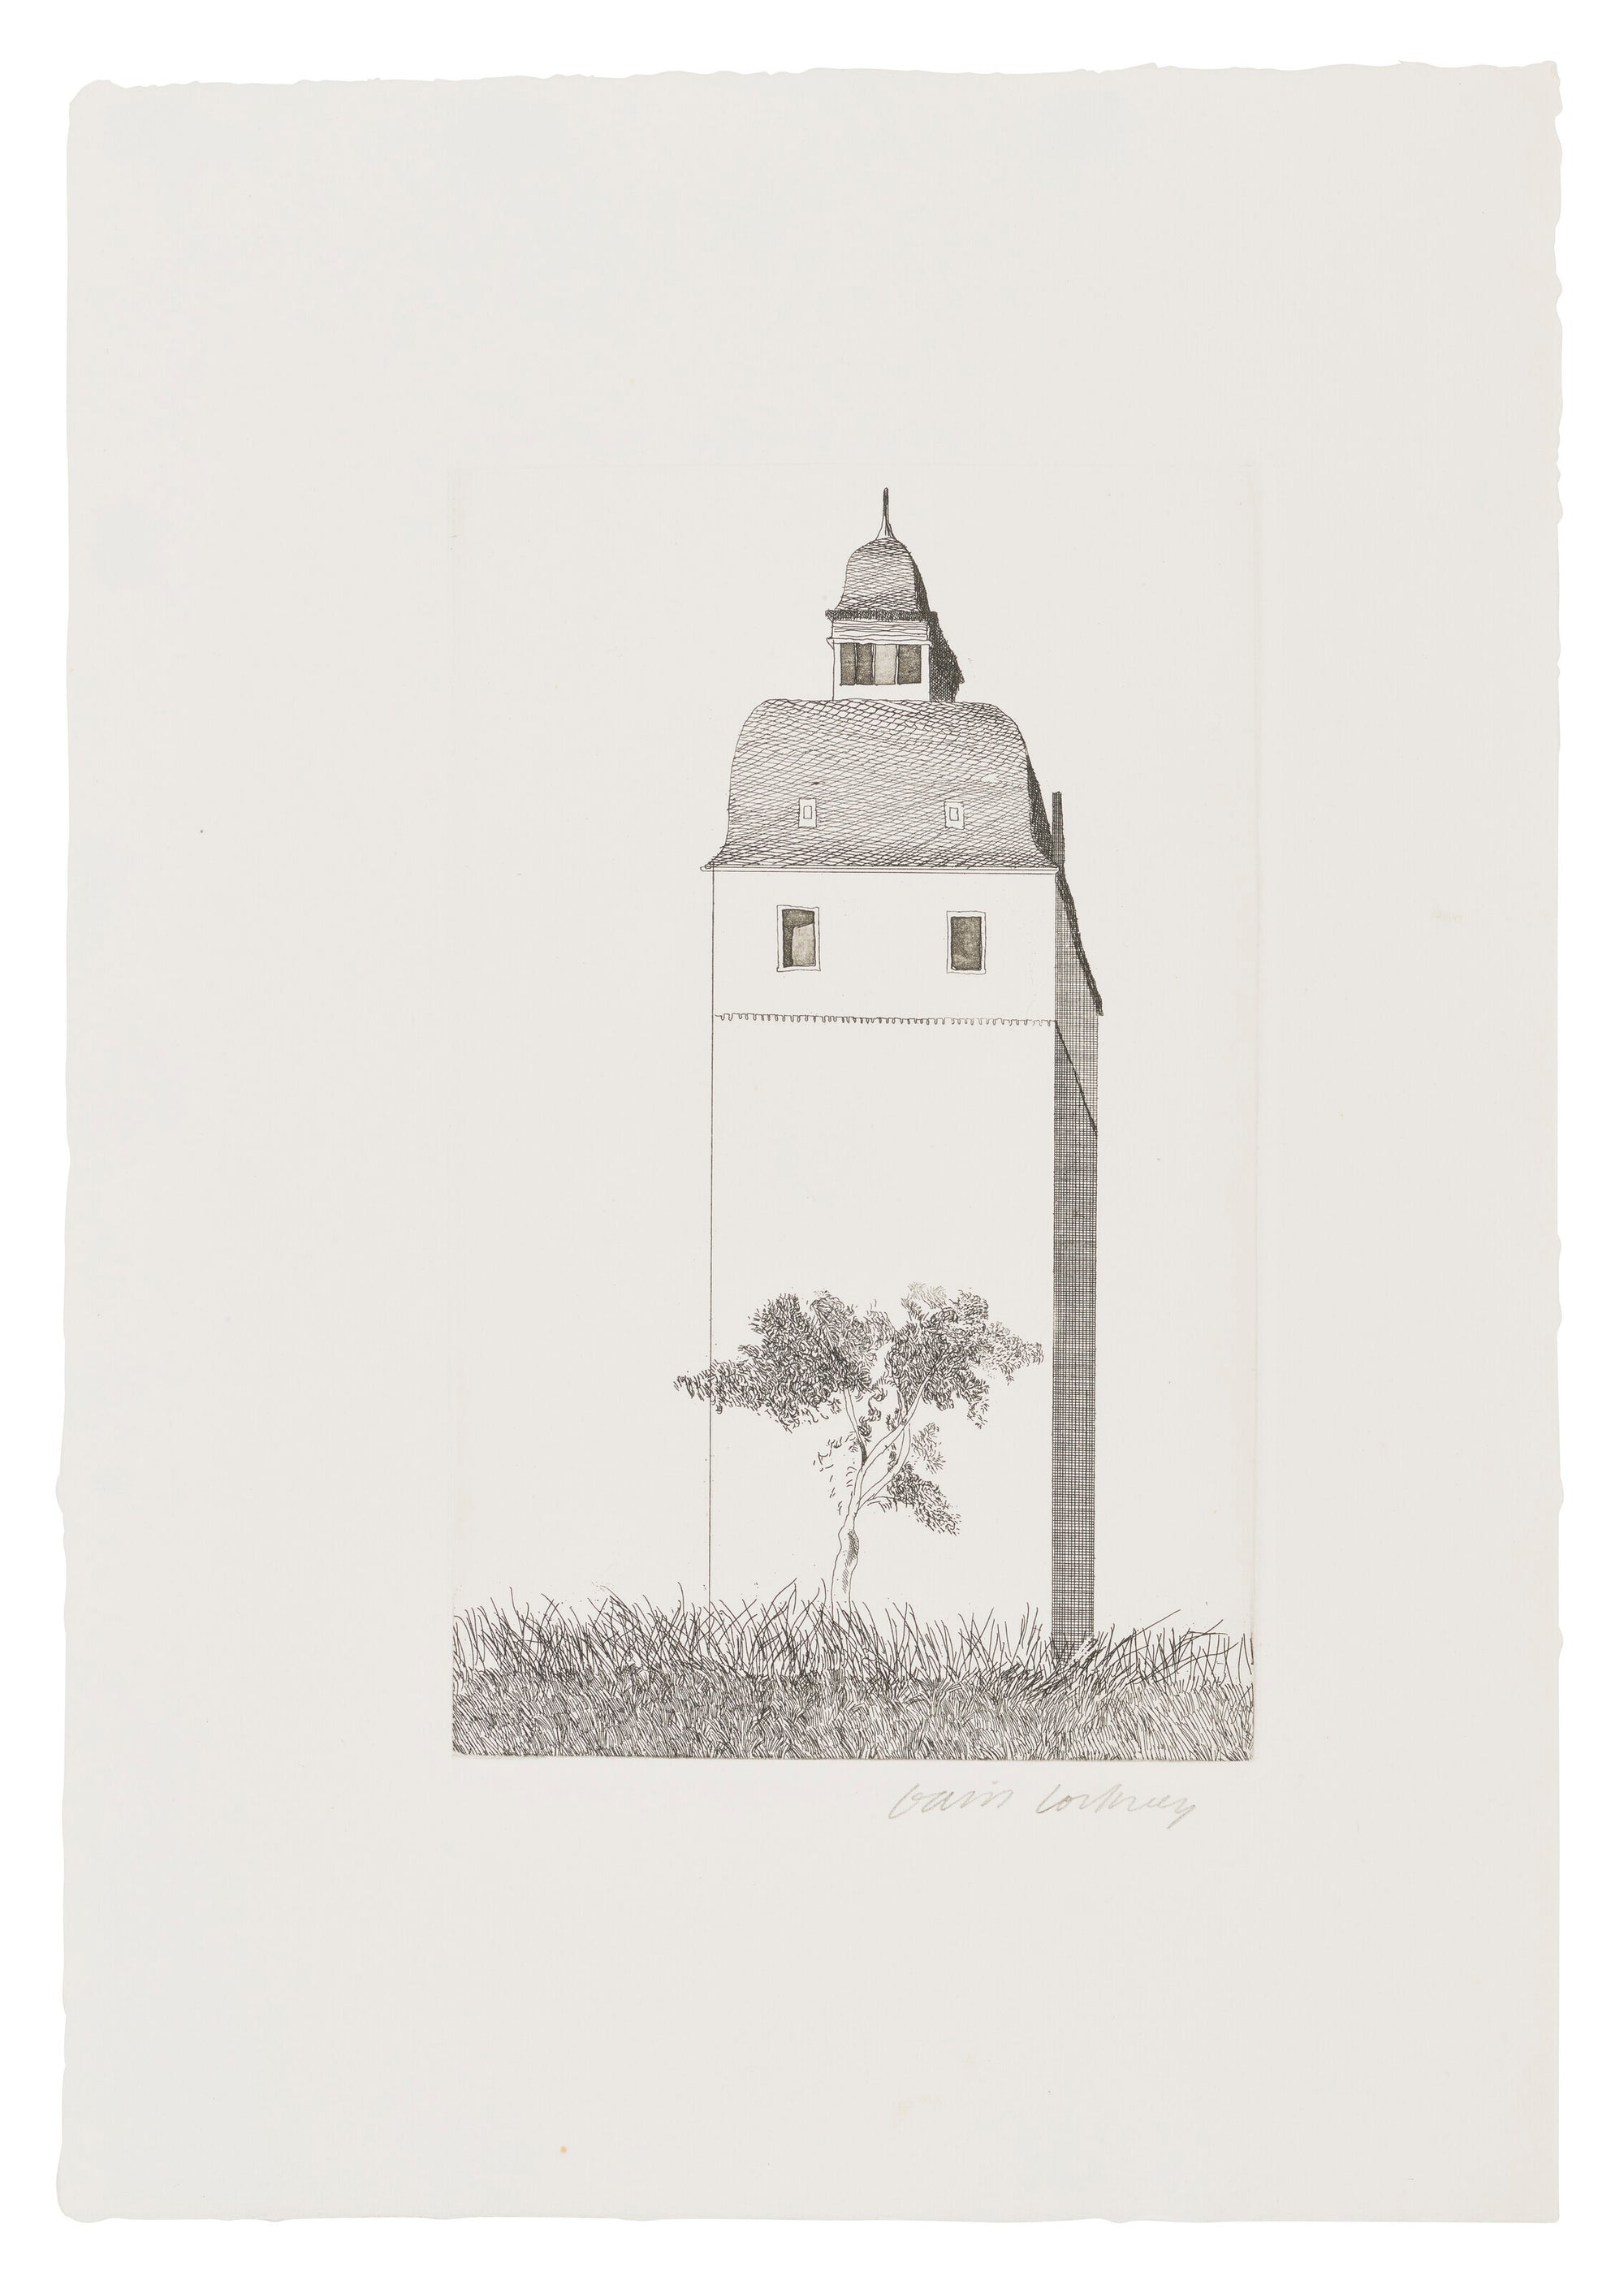 The Bell Tower (from Illustrations for Six Fairy Tales from The Brothers Grimm)